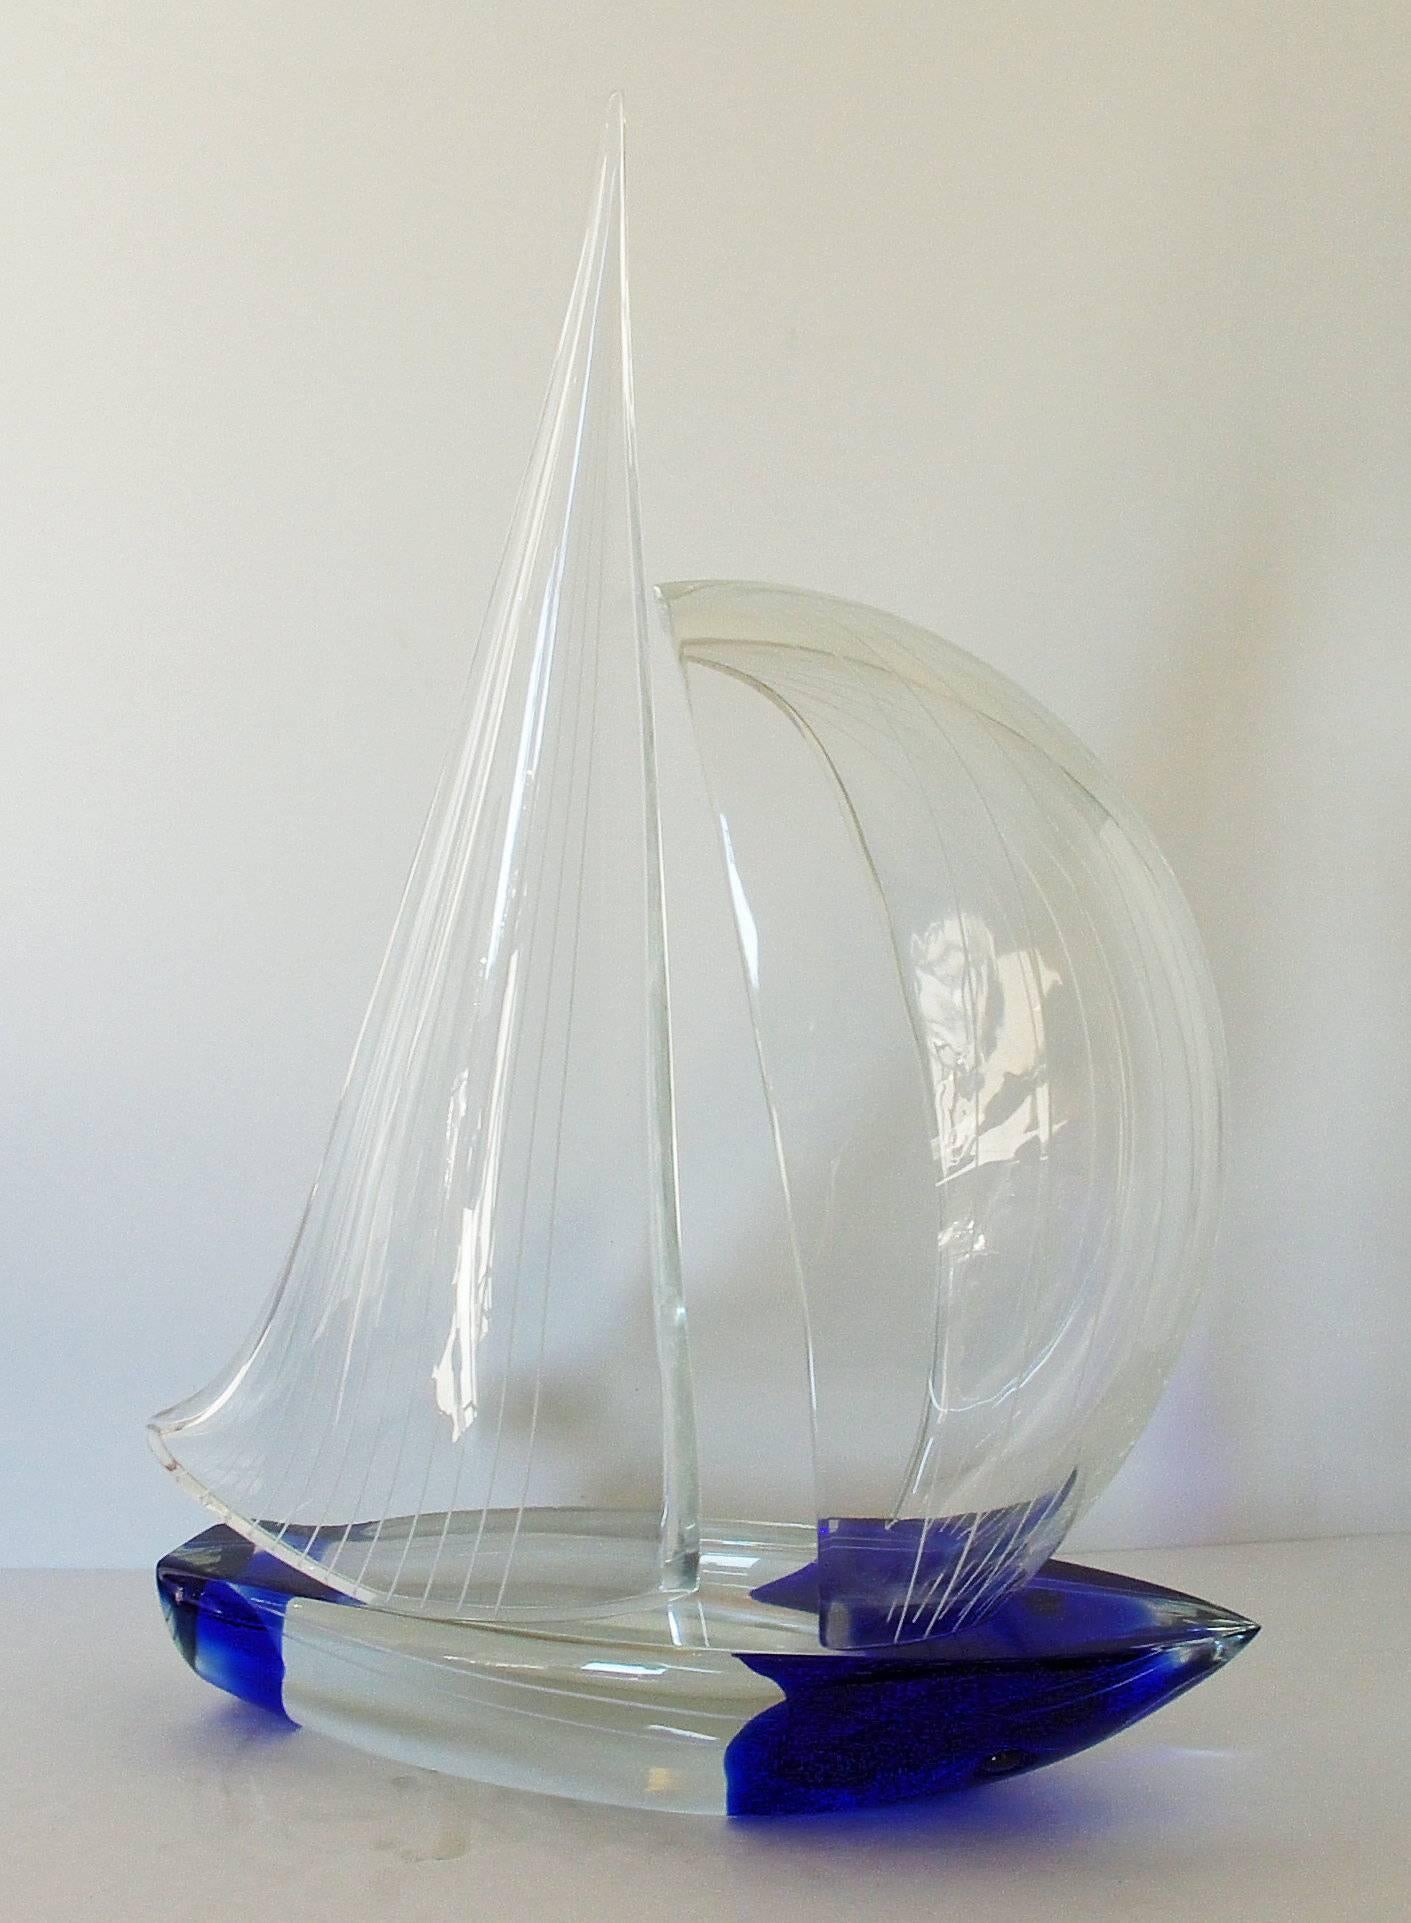 Vintage Italian double sail boat hand blown and crafted in clear and dark blue Murano glass by Alberto Dona'
Signed “Alberto Dona” on the base / Made in Italy in the 1980’s 
Height: 22 inches / Width: 17 inches / Depth: 7 inches 
1 in stock in Palm